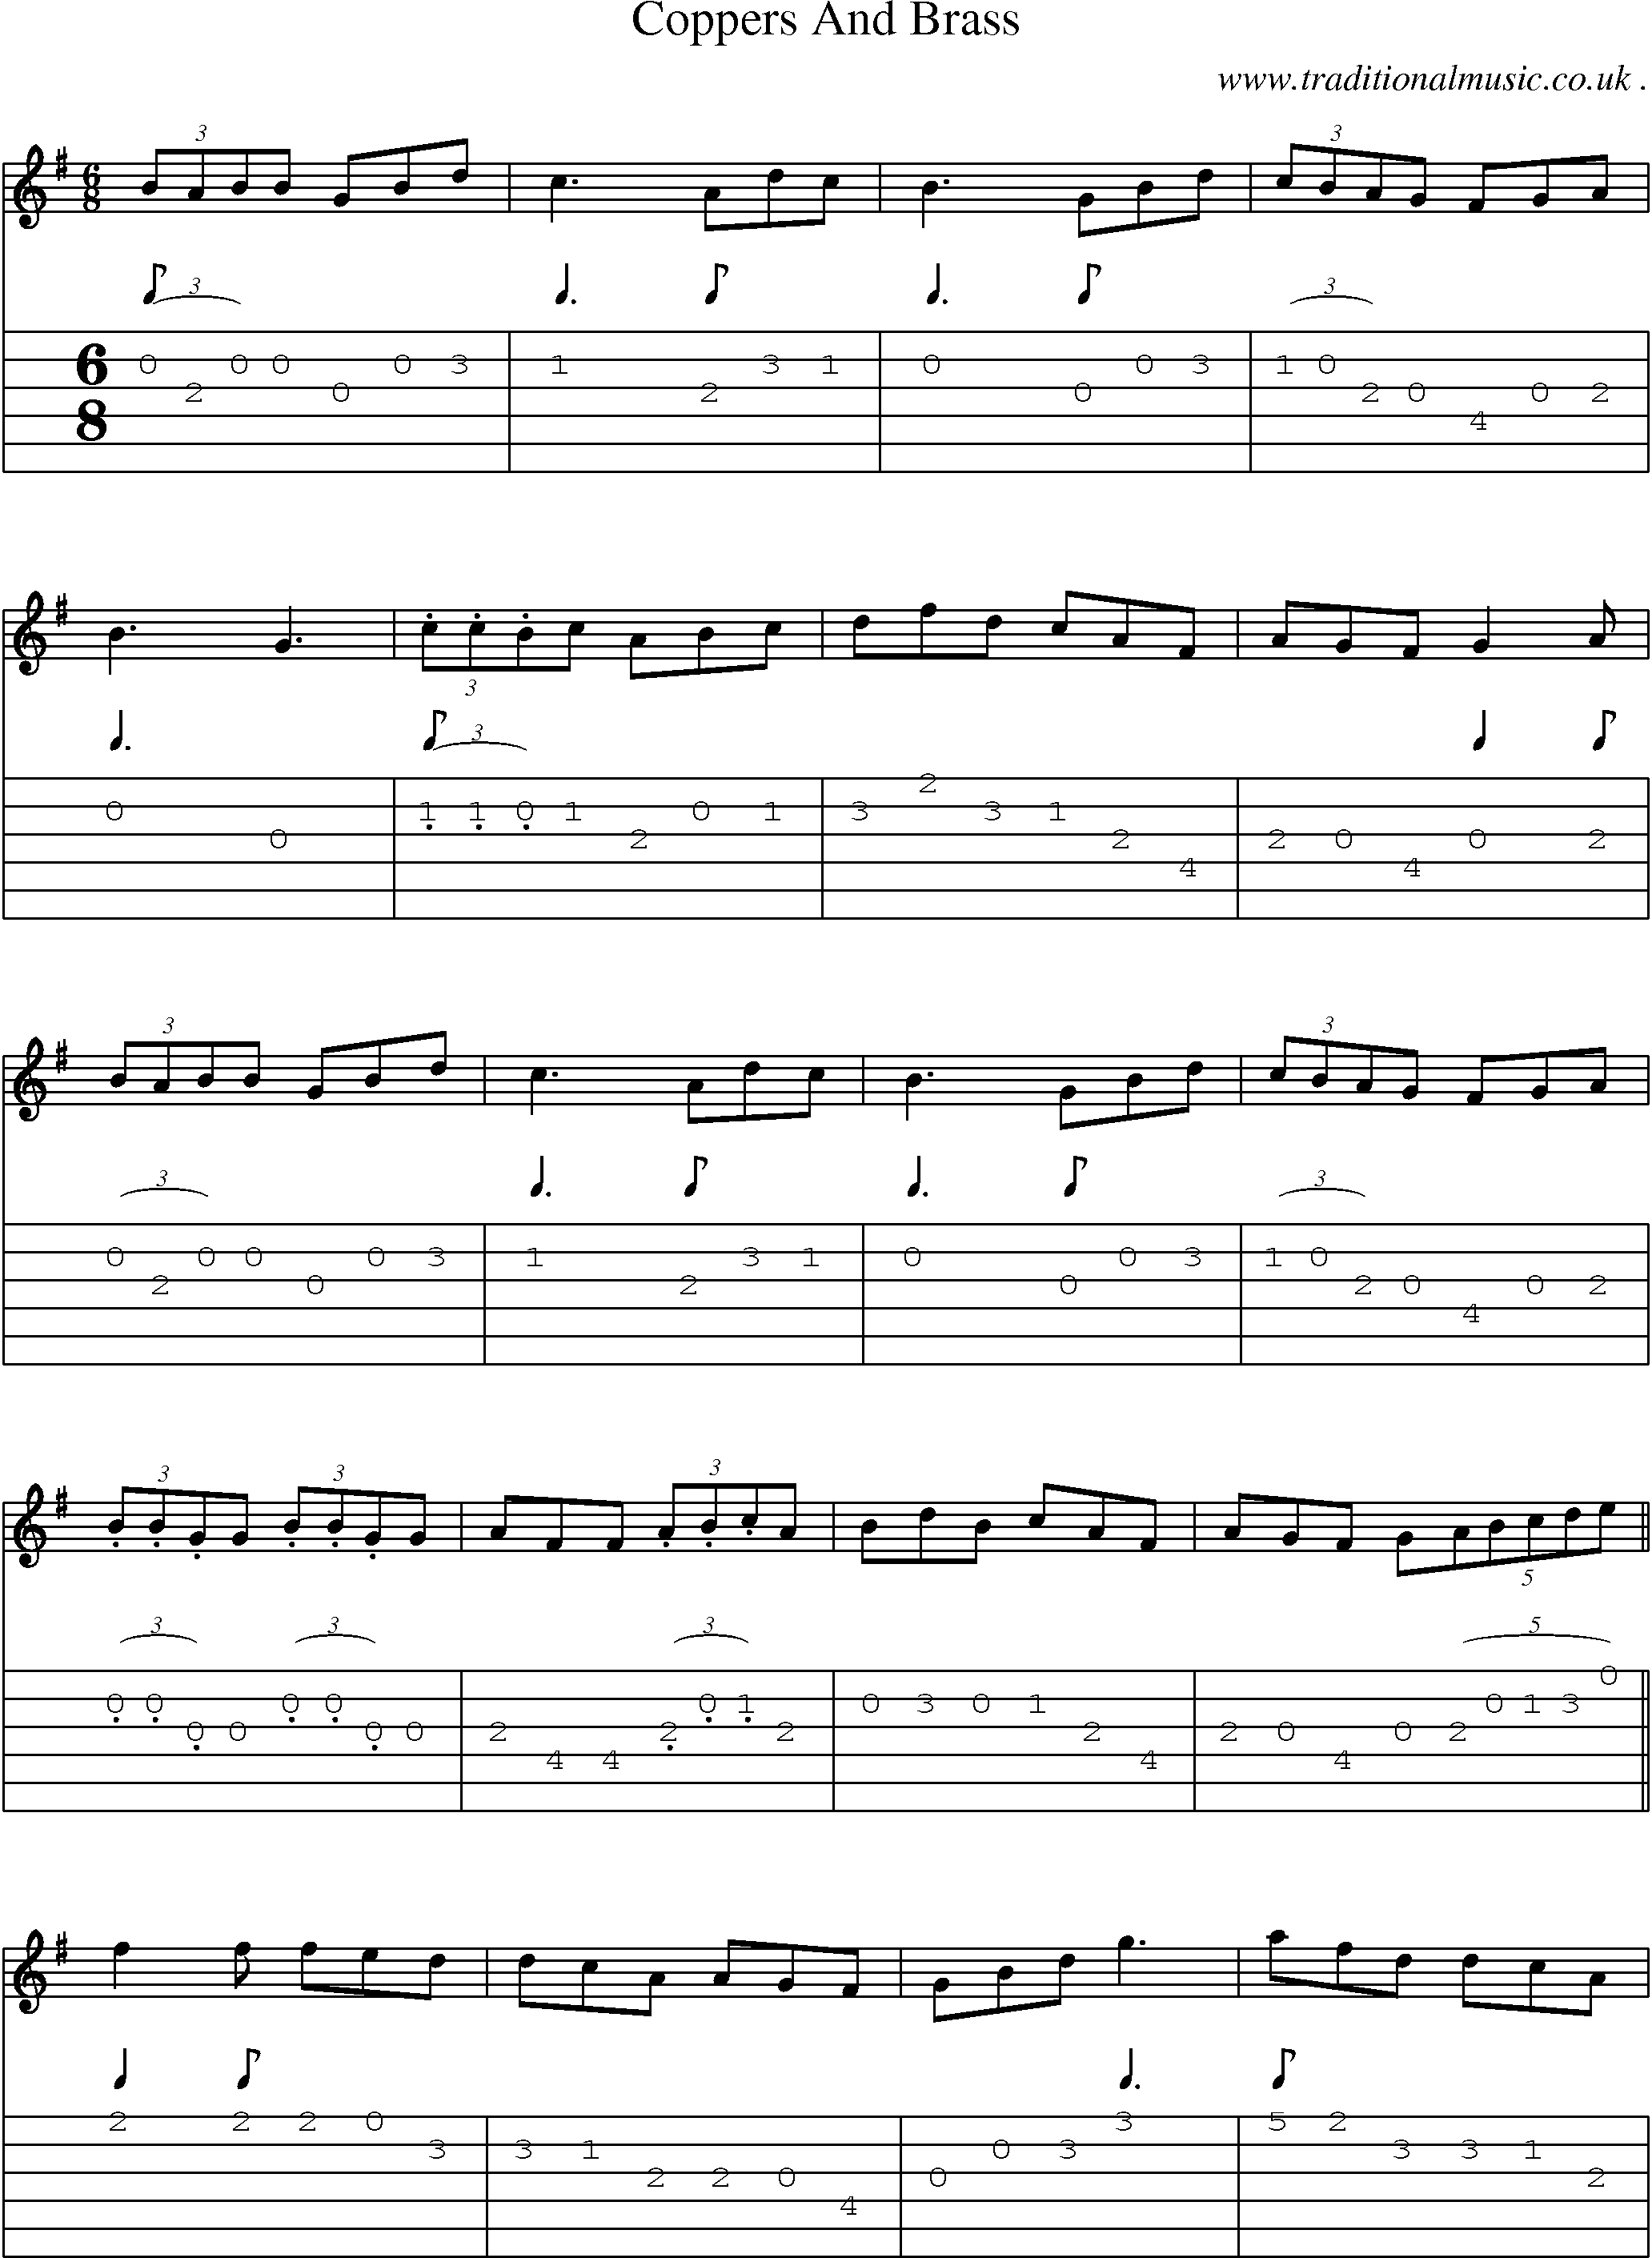 Sheet-Music and Guitar Tabs for Coppers And Brass